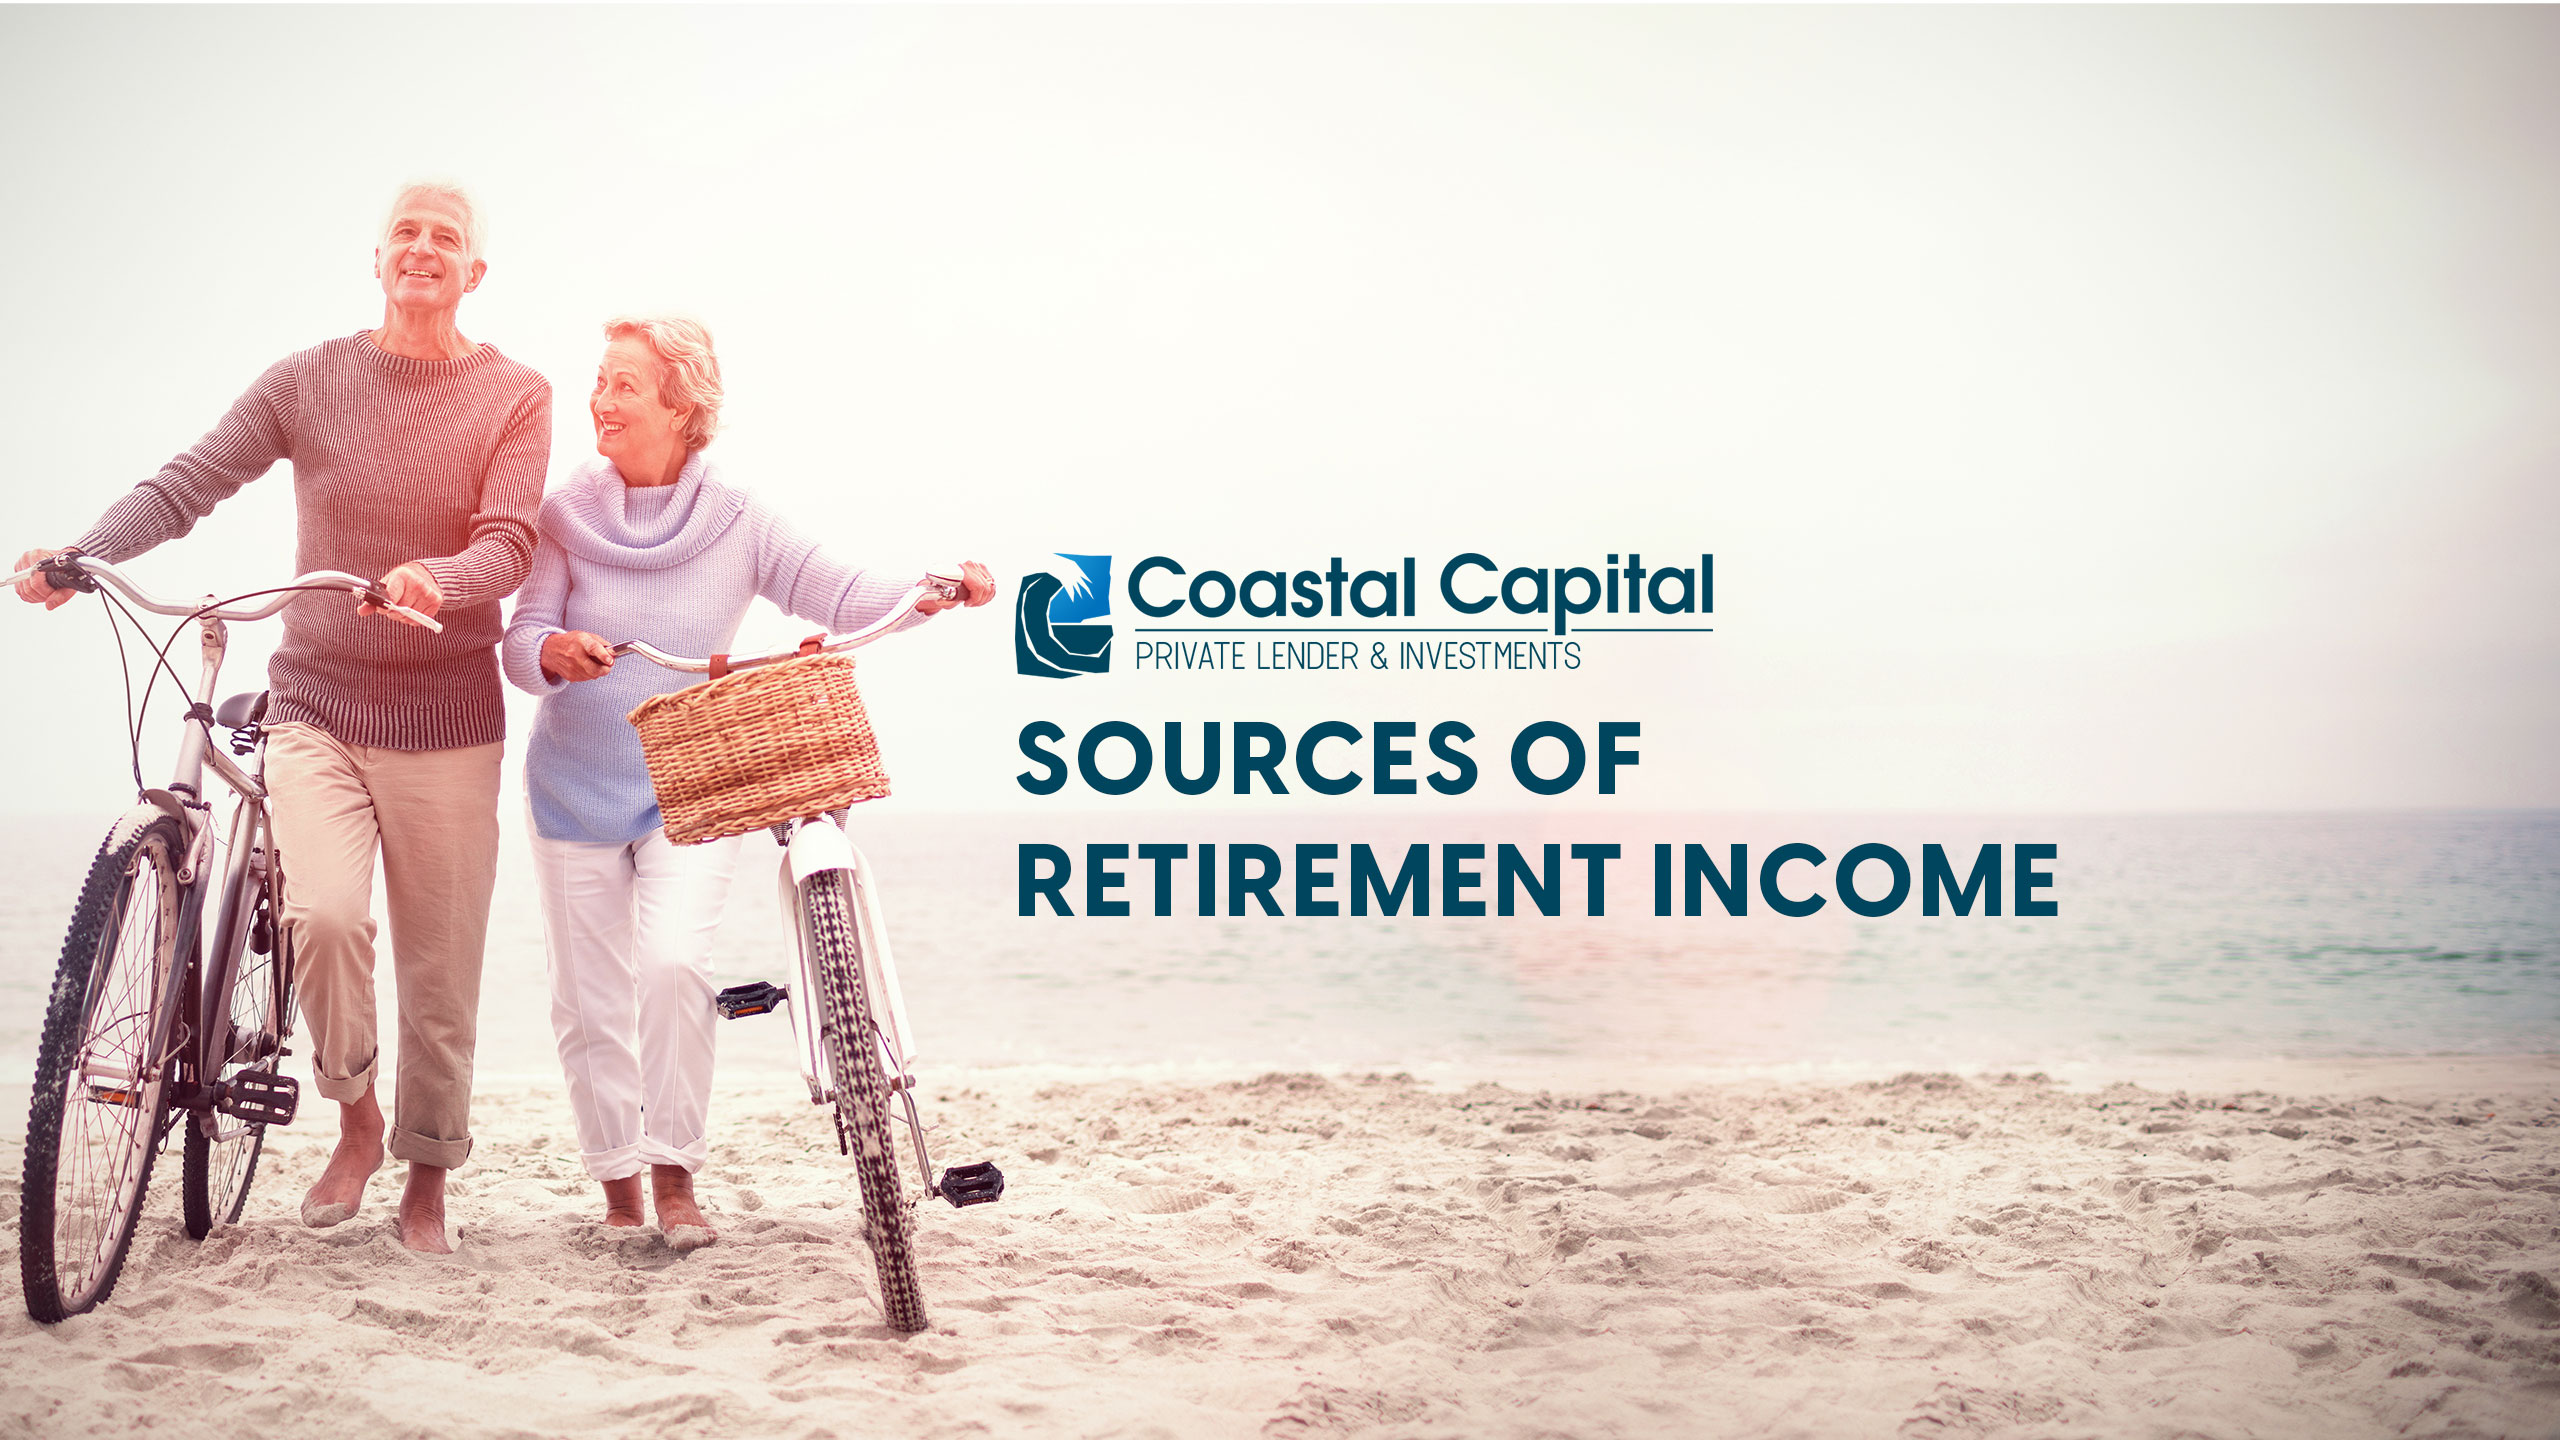 Sources of Retirement Income with Coastal Capital